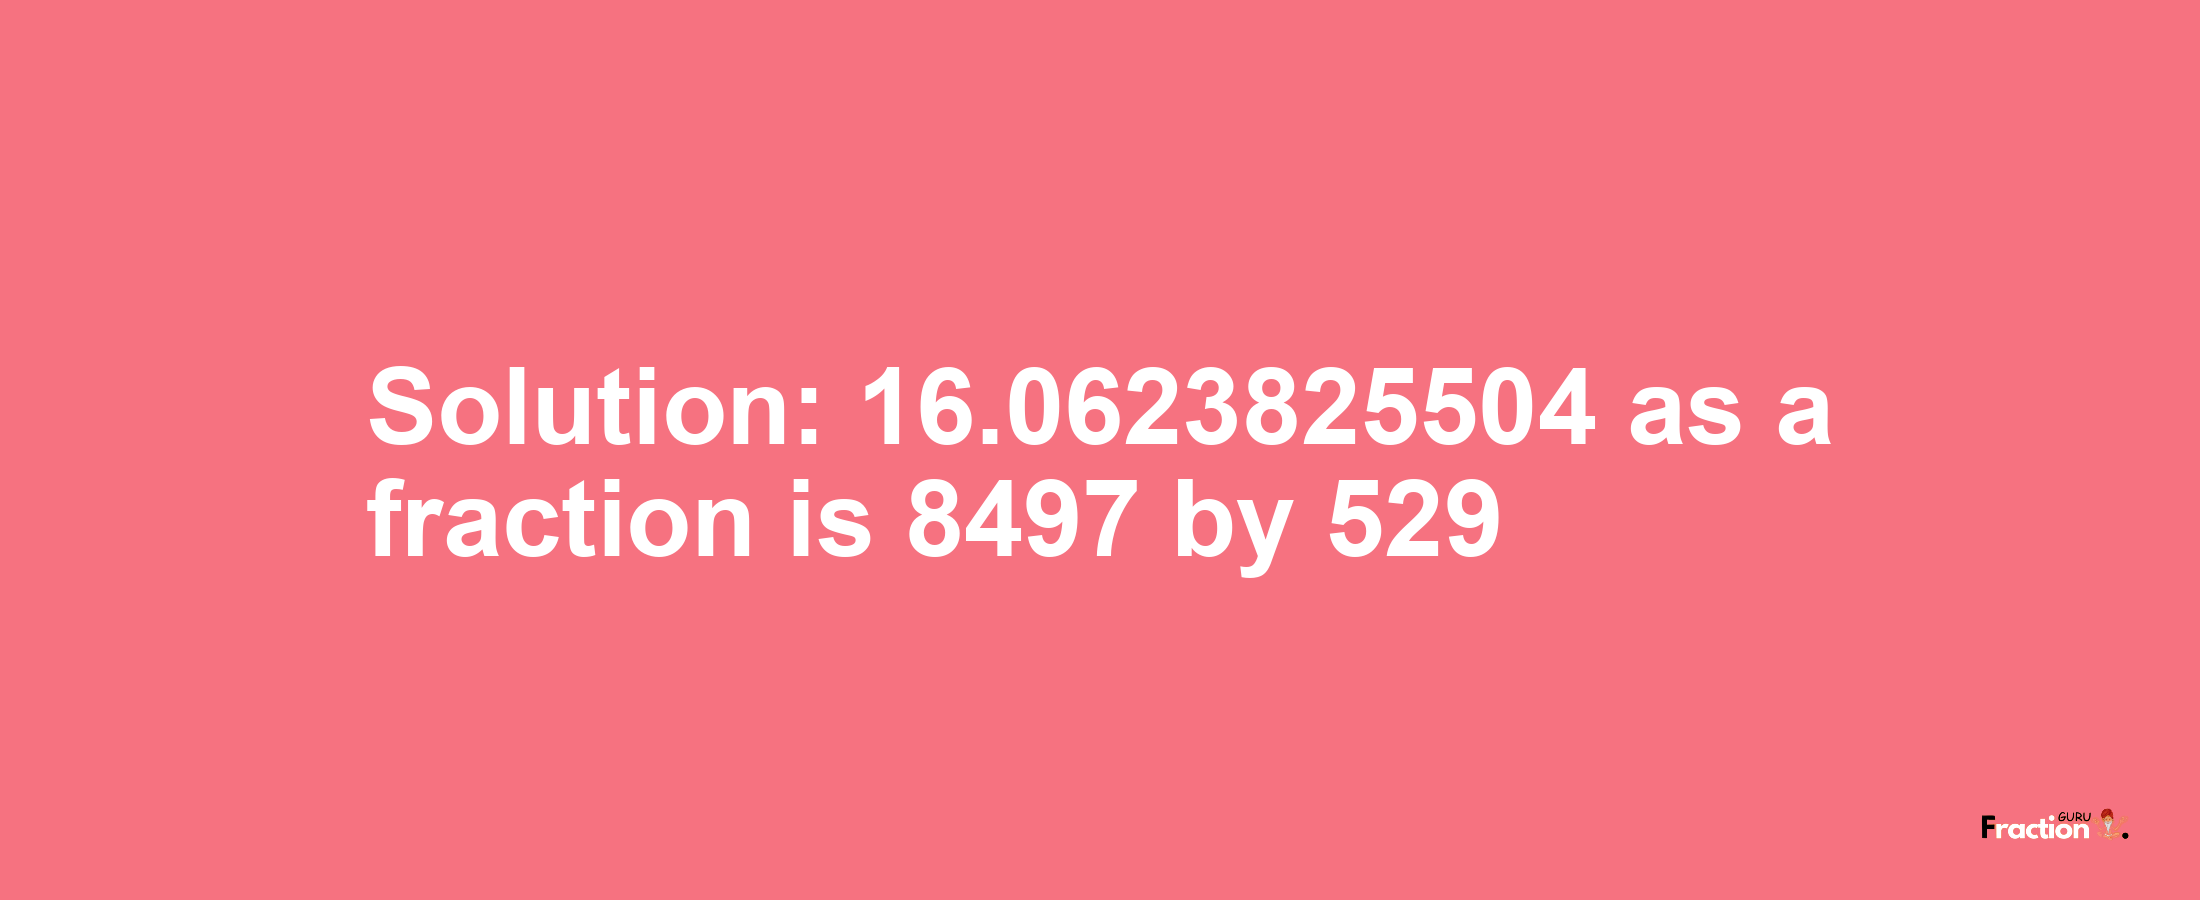 Solution:16.0623825504 as a fraction is 8497/529